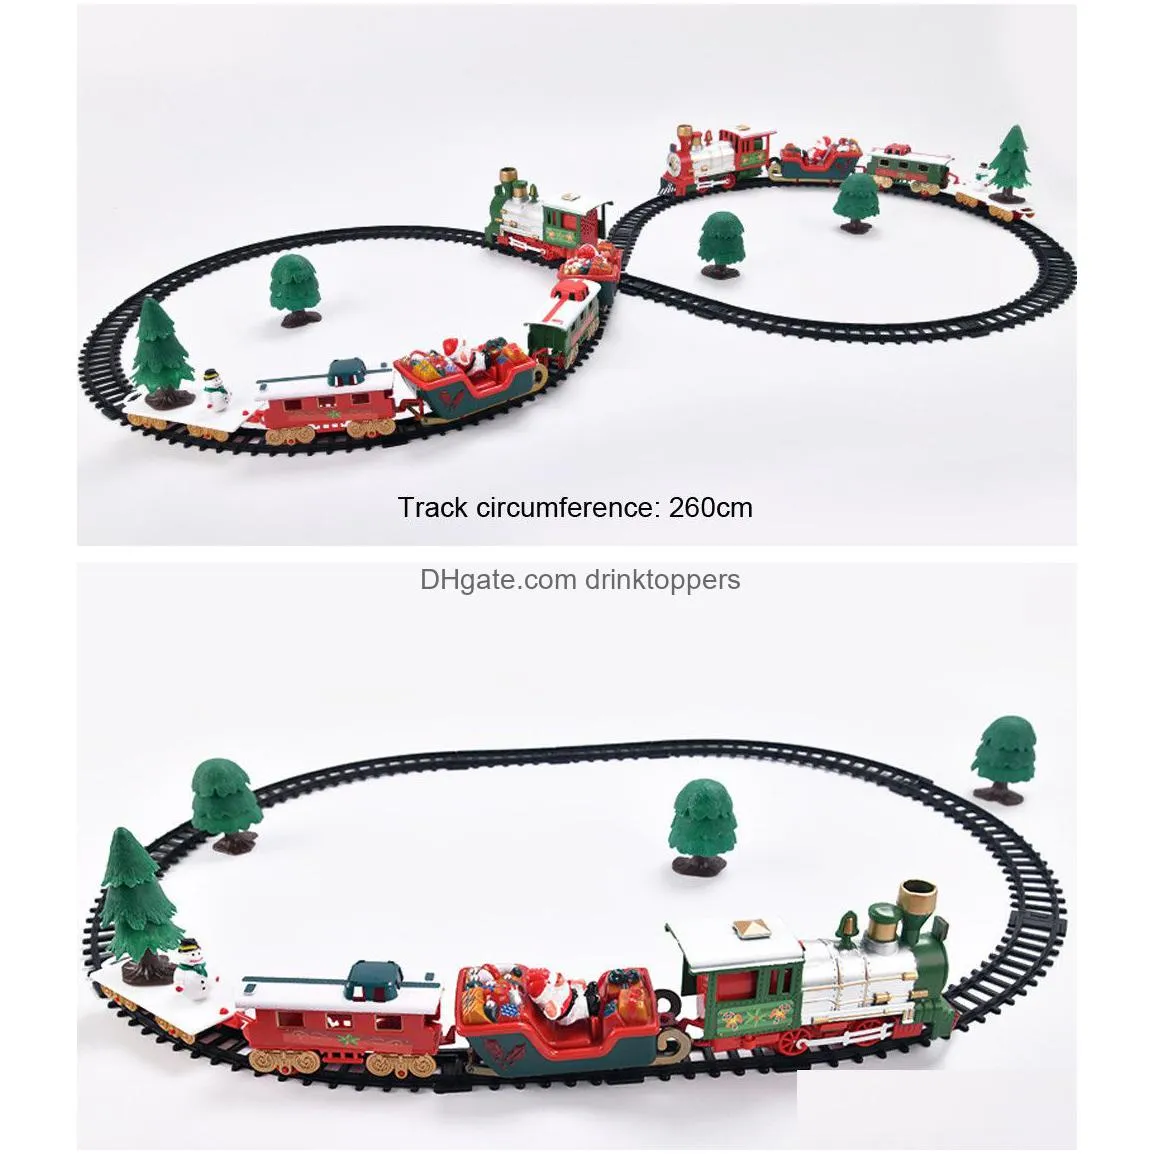 40 christmas train set with lights and sounds christmas train set railway tracks battery operated toys xmas train gift for kids